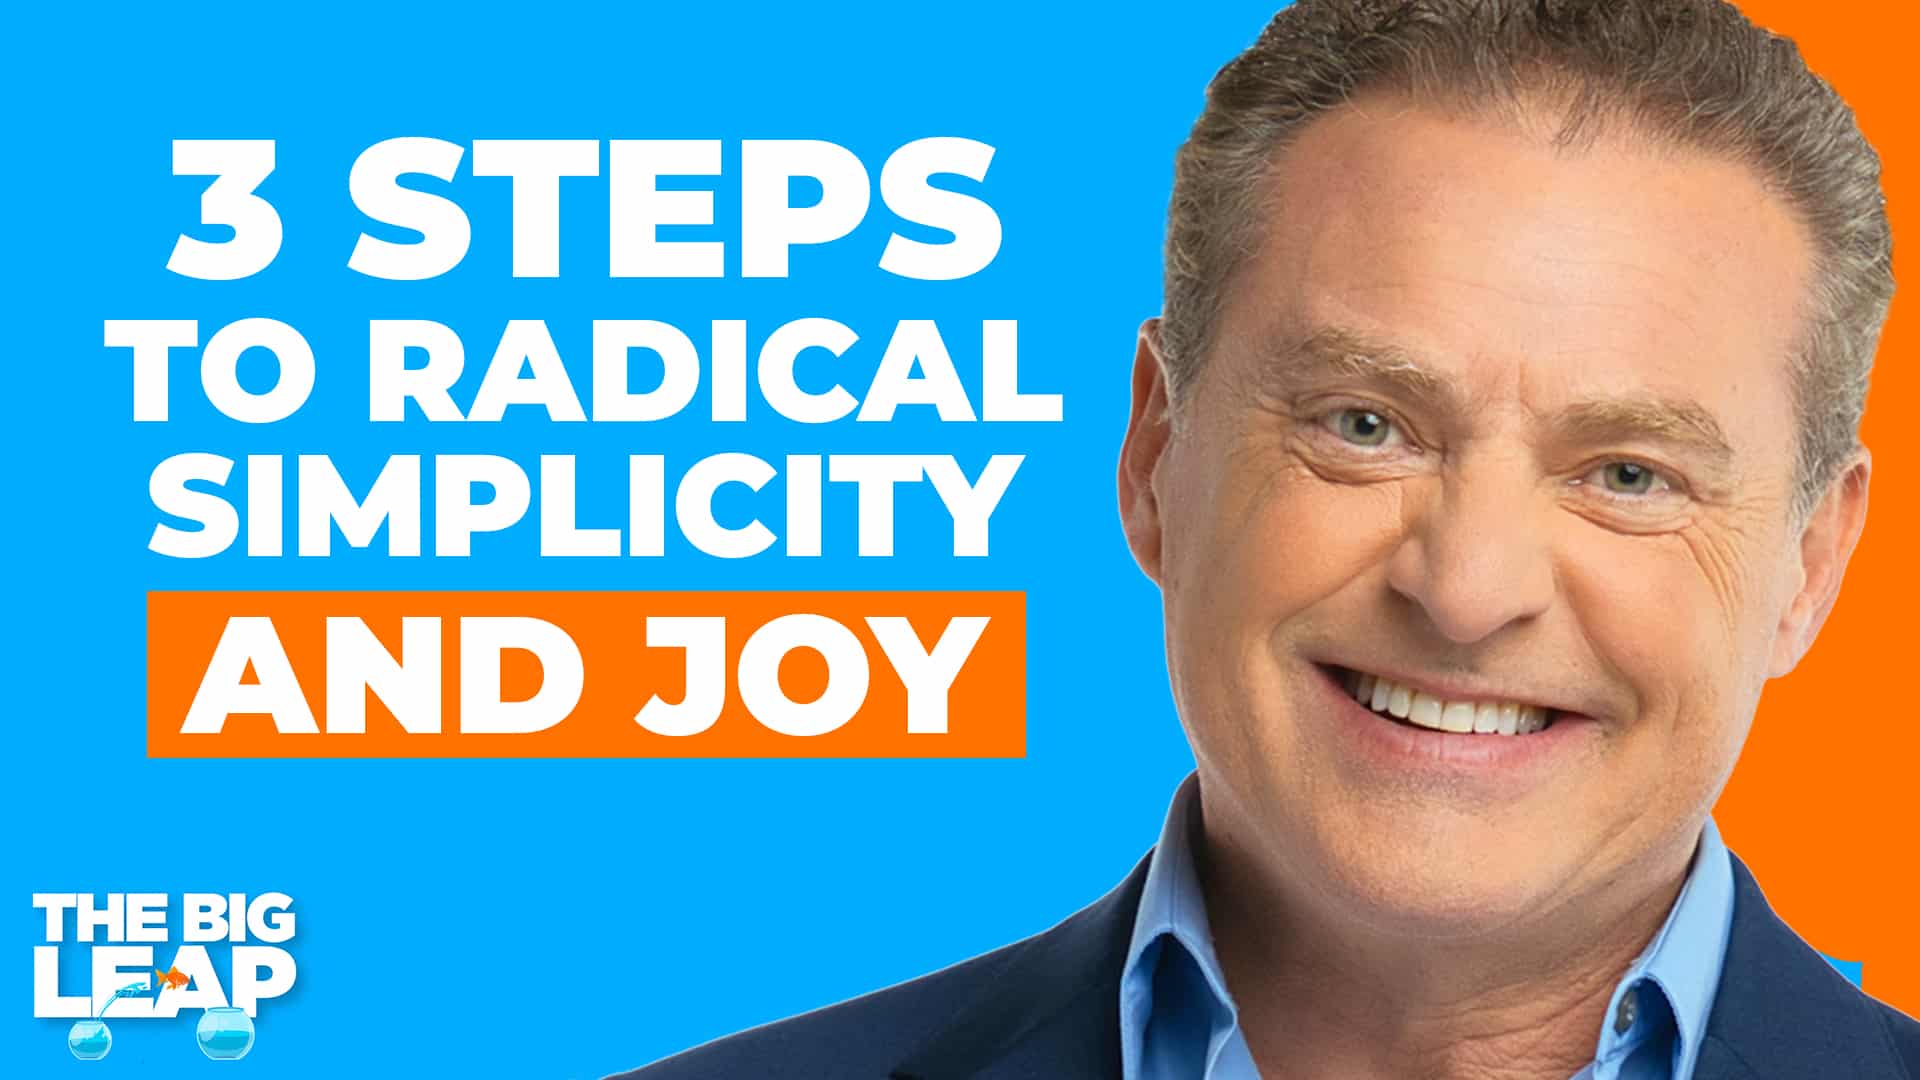 The Big Leap Episode 92 Cover Photo showing a photo of Mike Koenigs and the words: “3 Steps to Radical Simplicity and Joy."